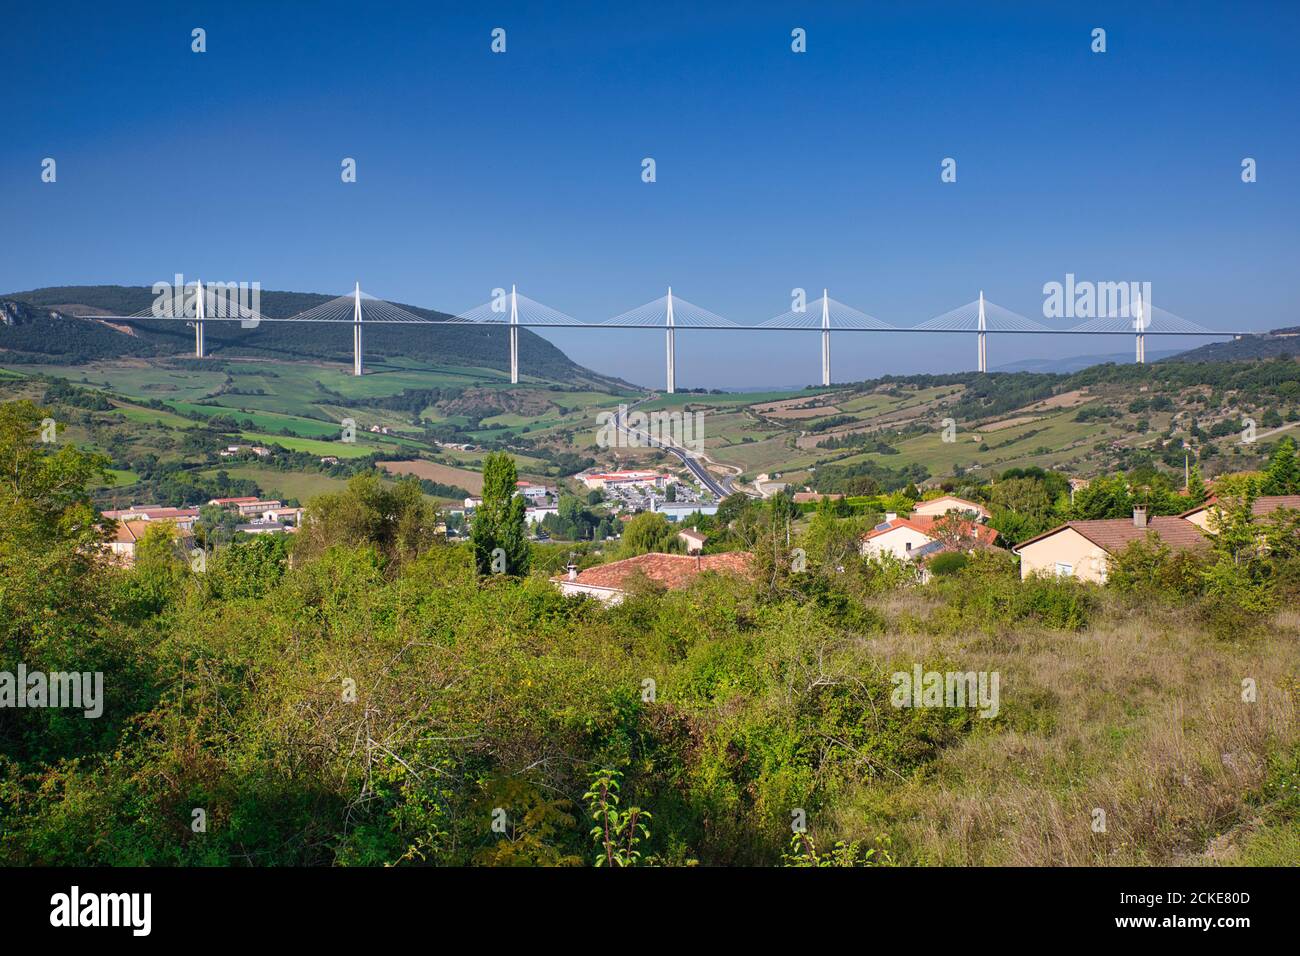 The complete Viaduc de Millau - Millau Viaduct from the Millau town, with all the pillars of the amazing suspension bridge, Aveyron, France Stock Photo